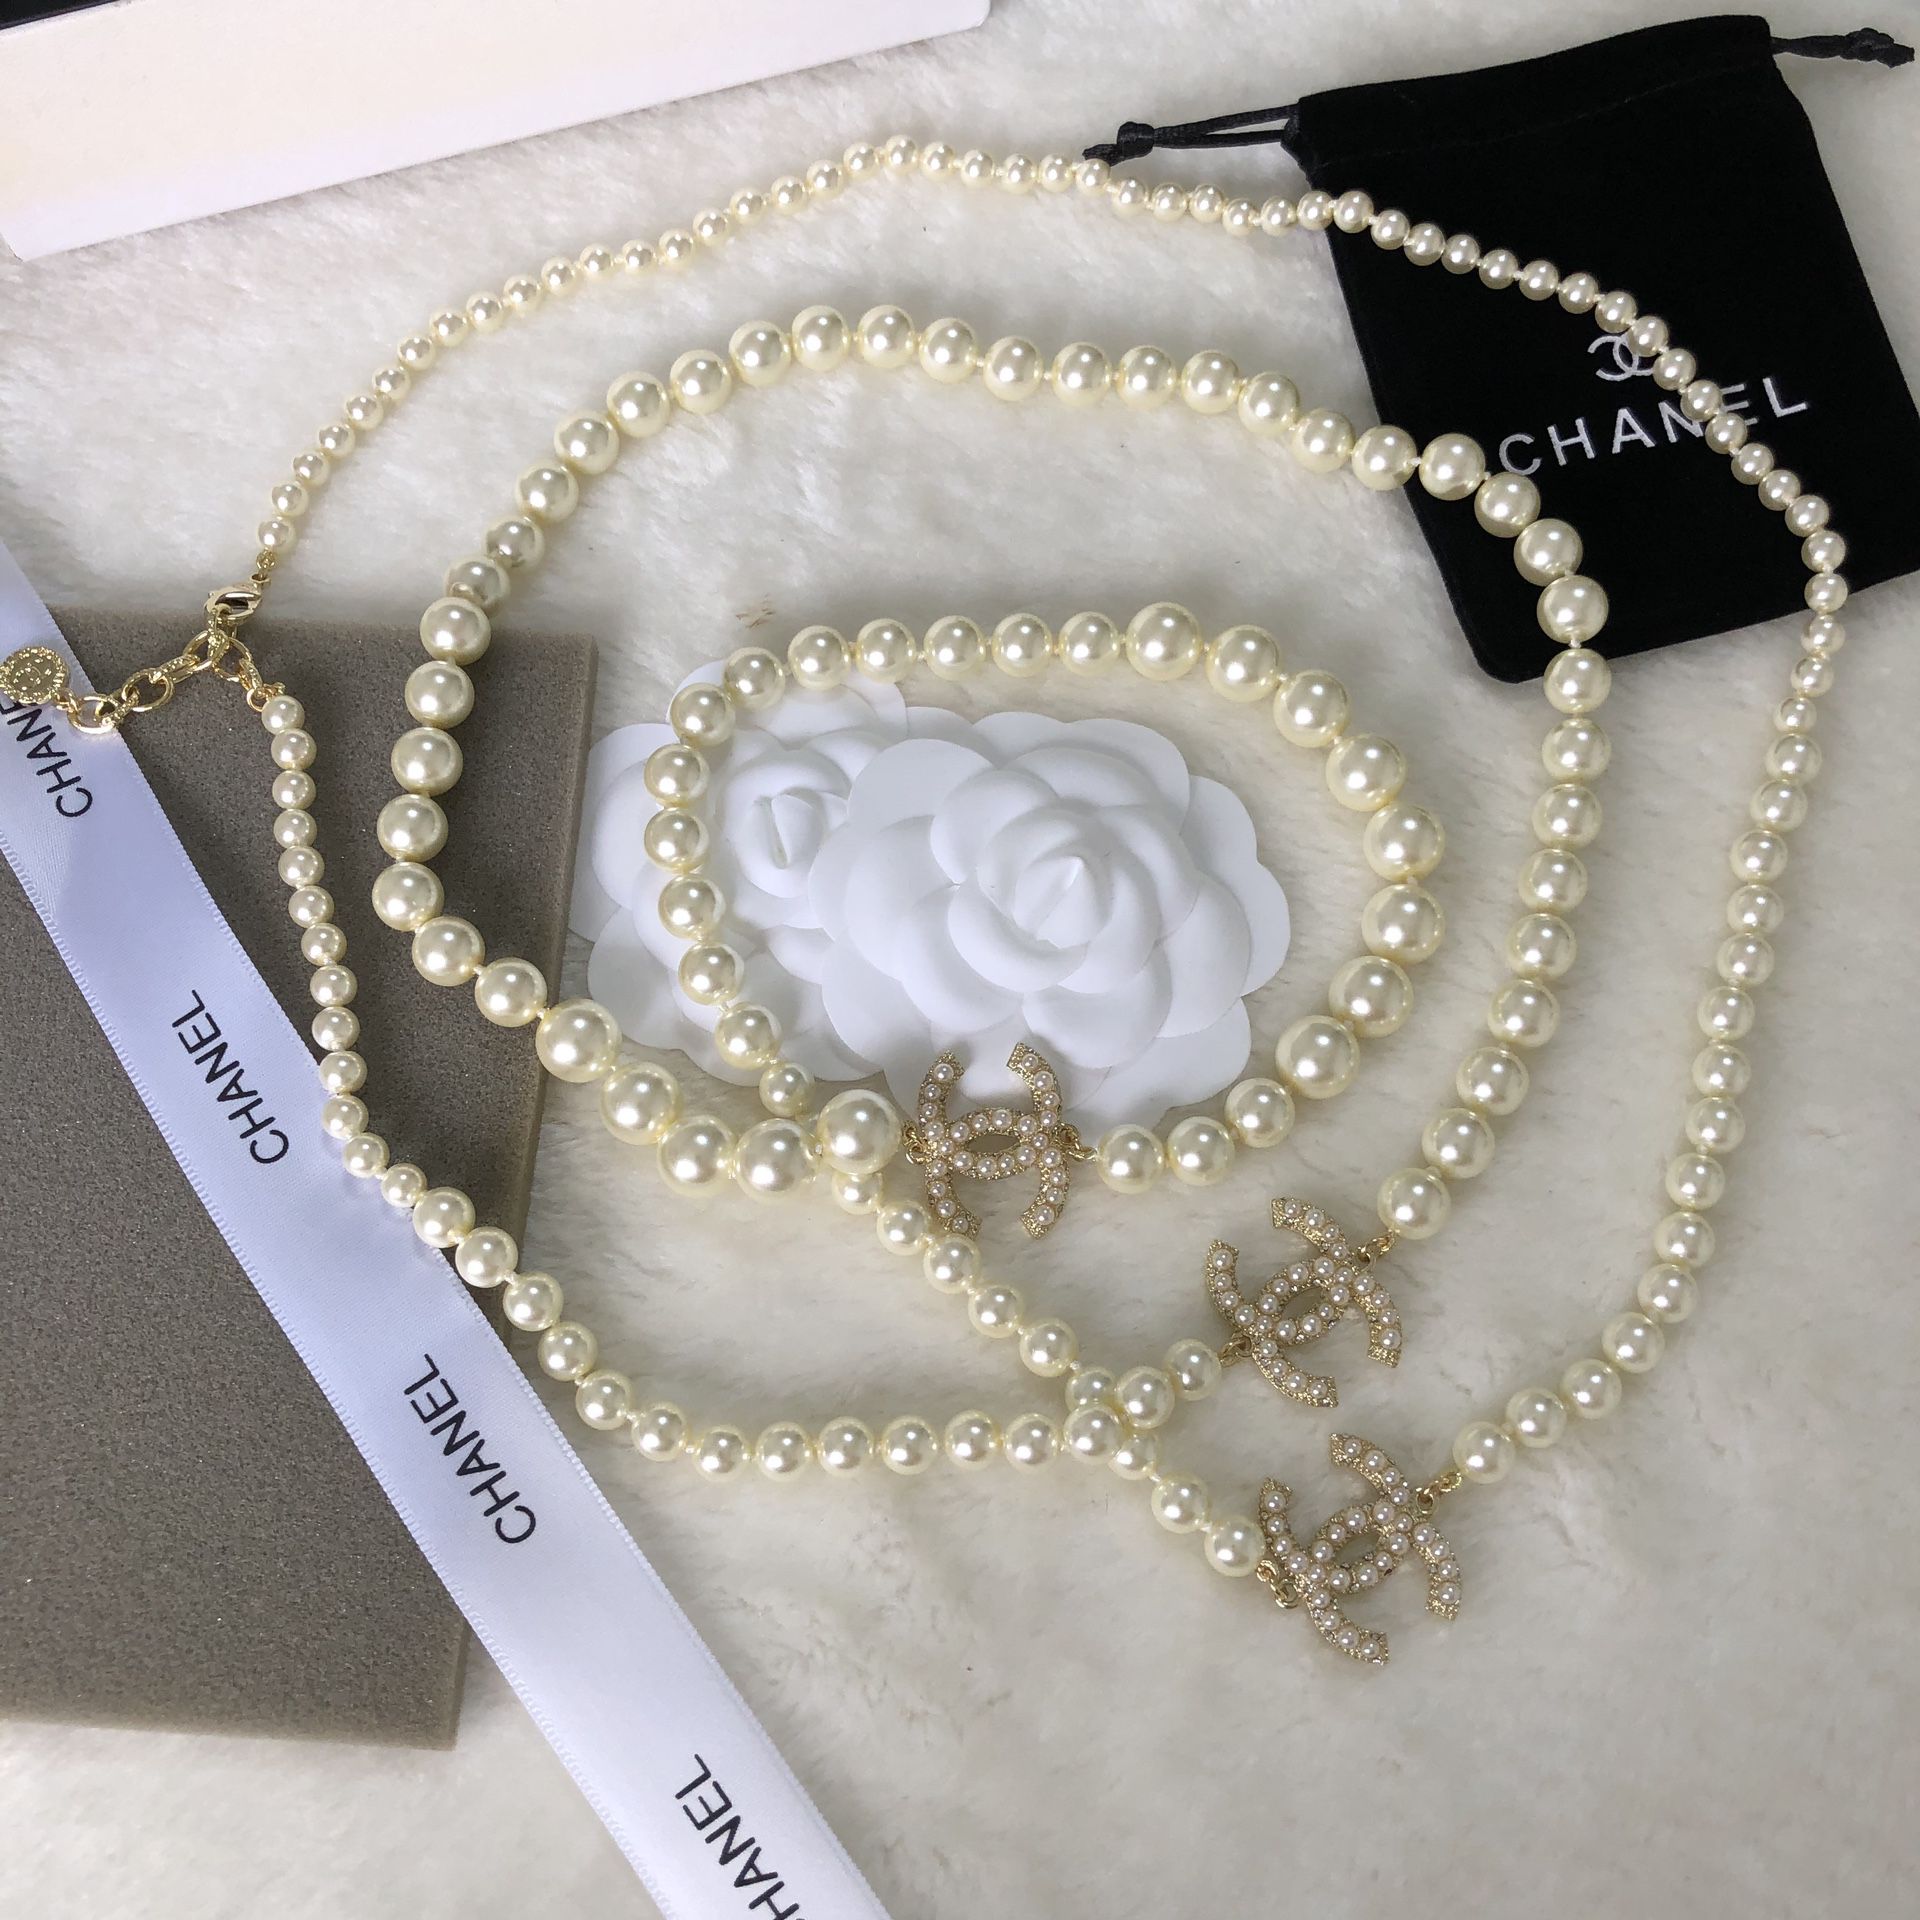 Chanel necklace Chanel CC COCO pearl necklace for Sale in Concord